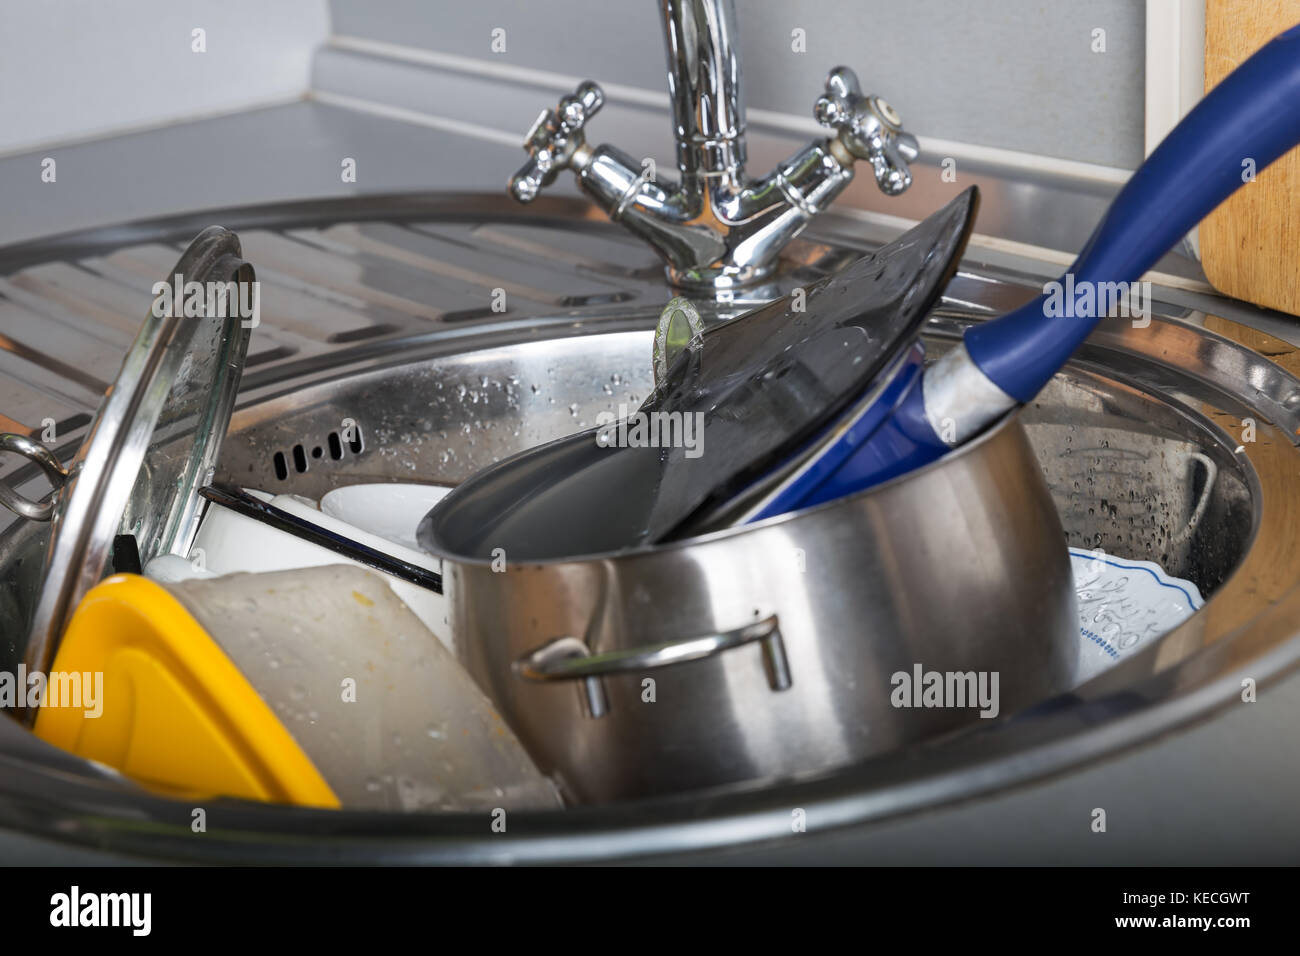 Dirty dishes in the kitchen sink Stock Photo